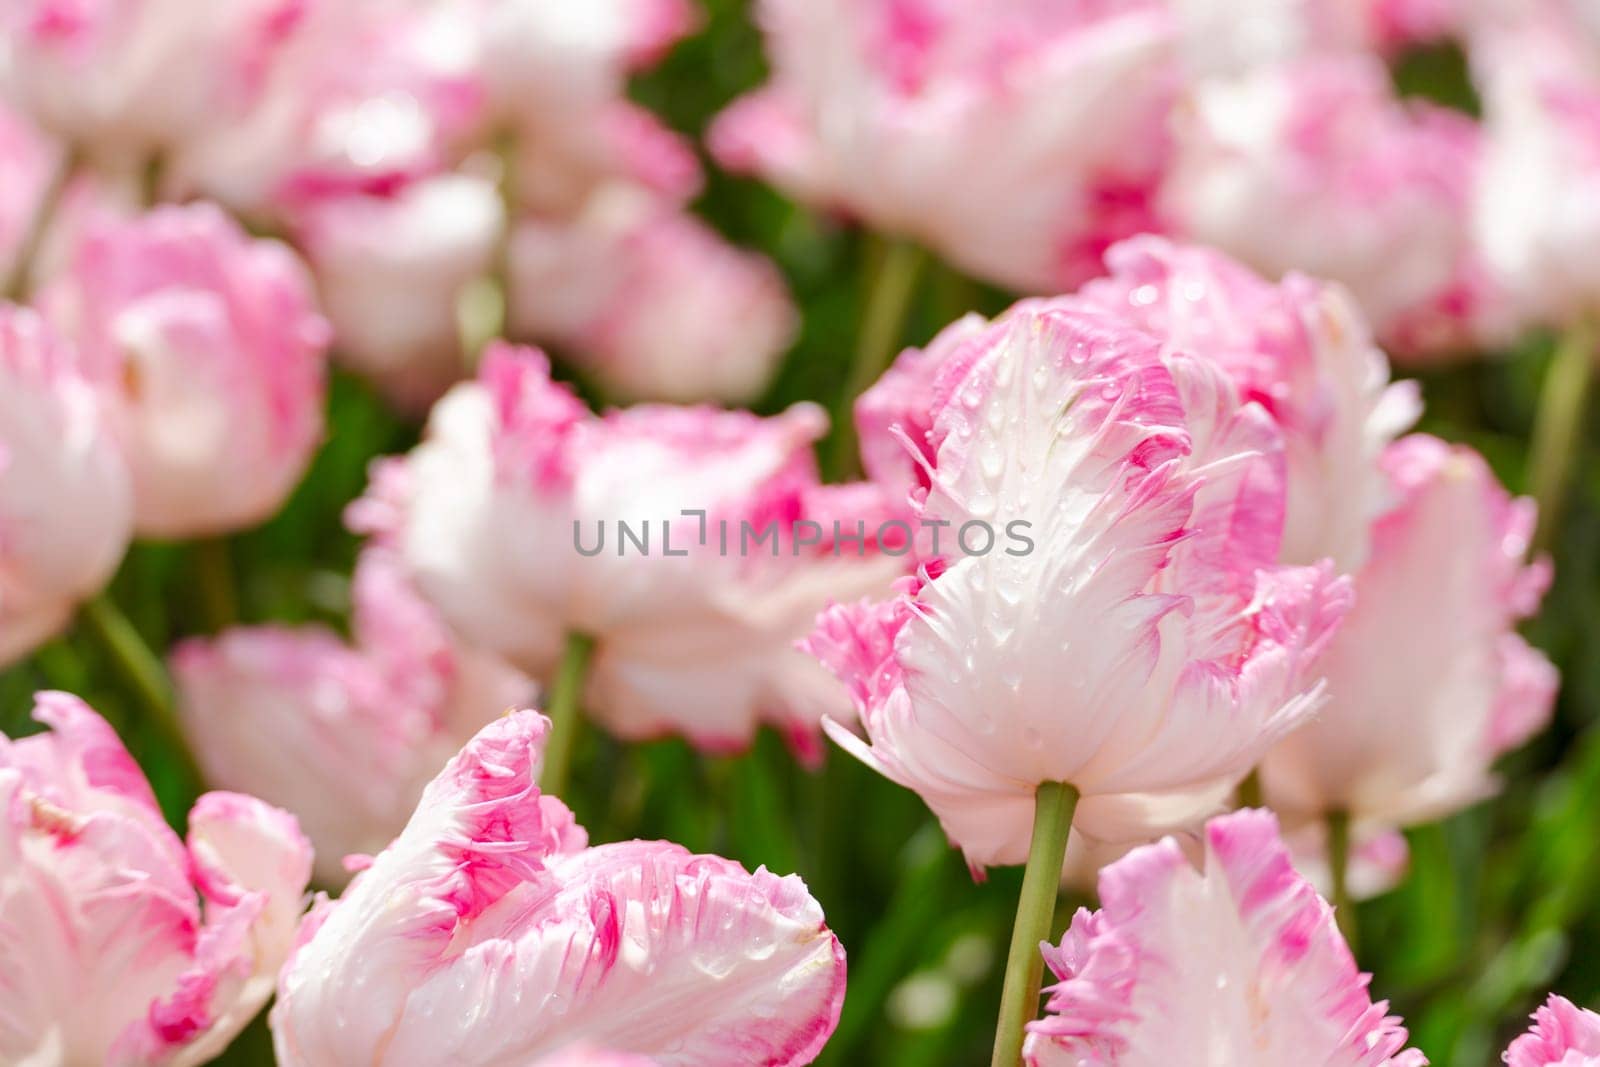 Tulip field. Pink tulips with white stripe close-up. Growing flowers in spring. by Matiunina